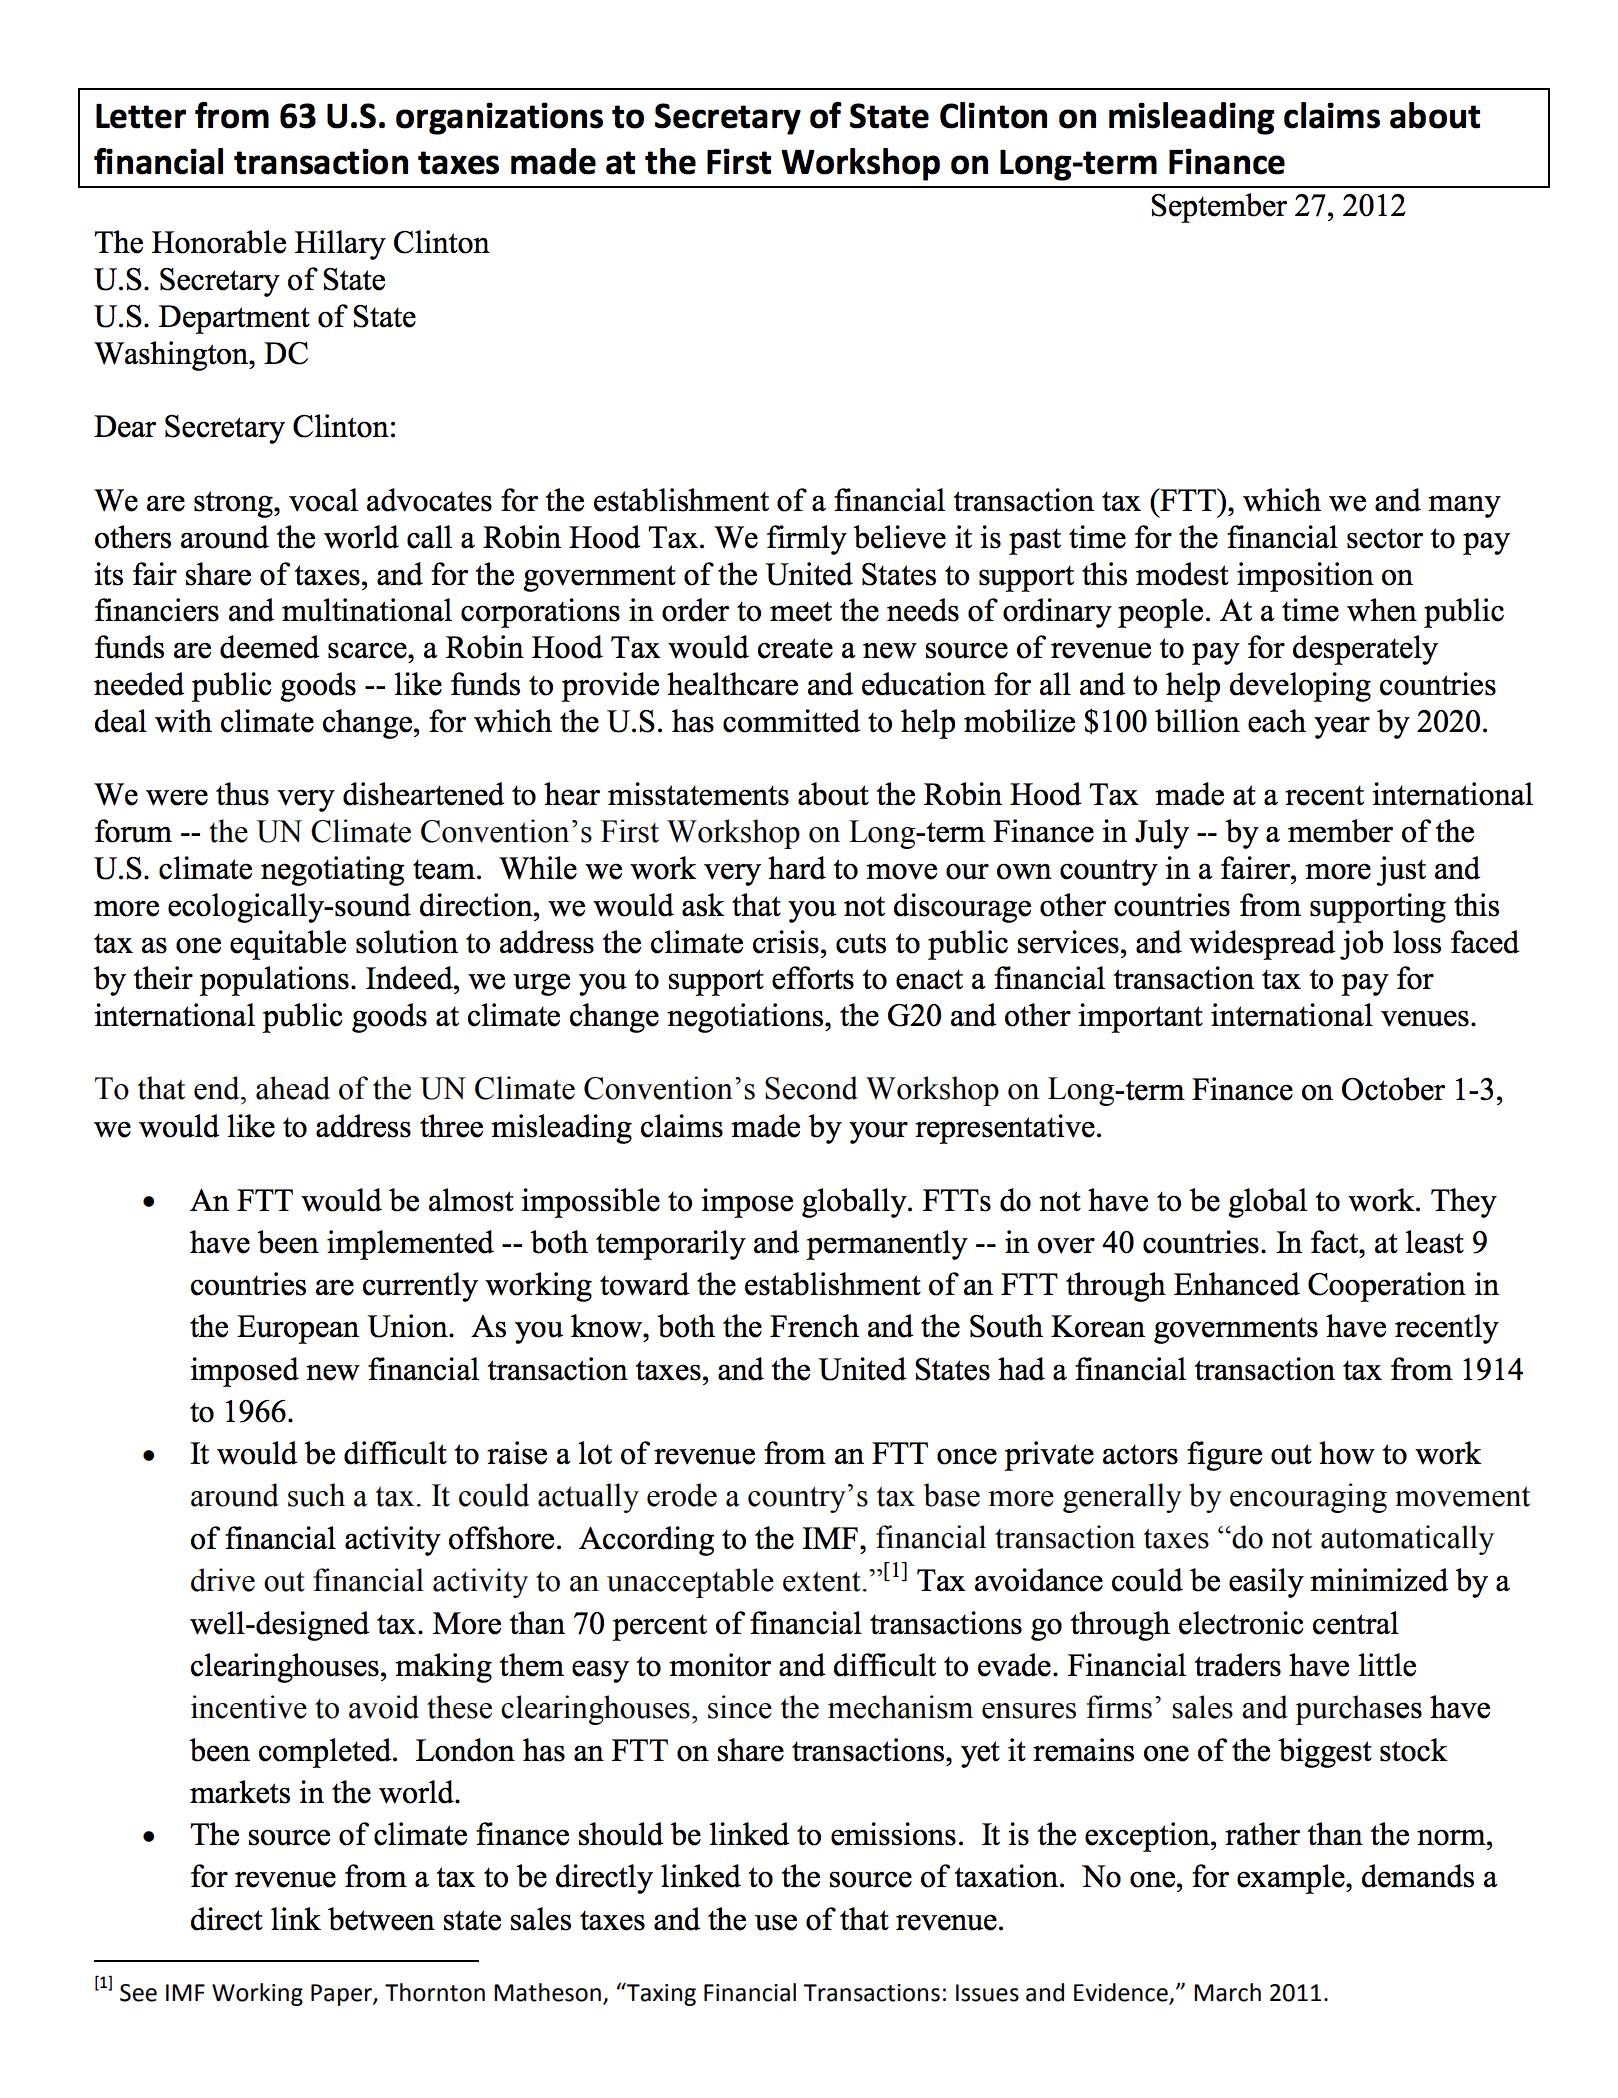 Letter to Secretary of State Hillary Clinton RE: Robin Hood Tax